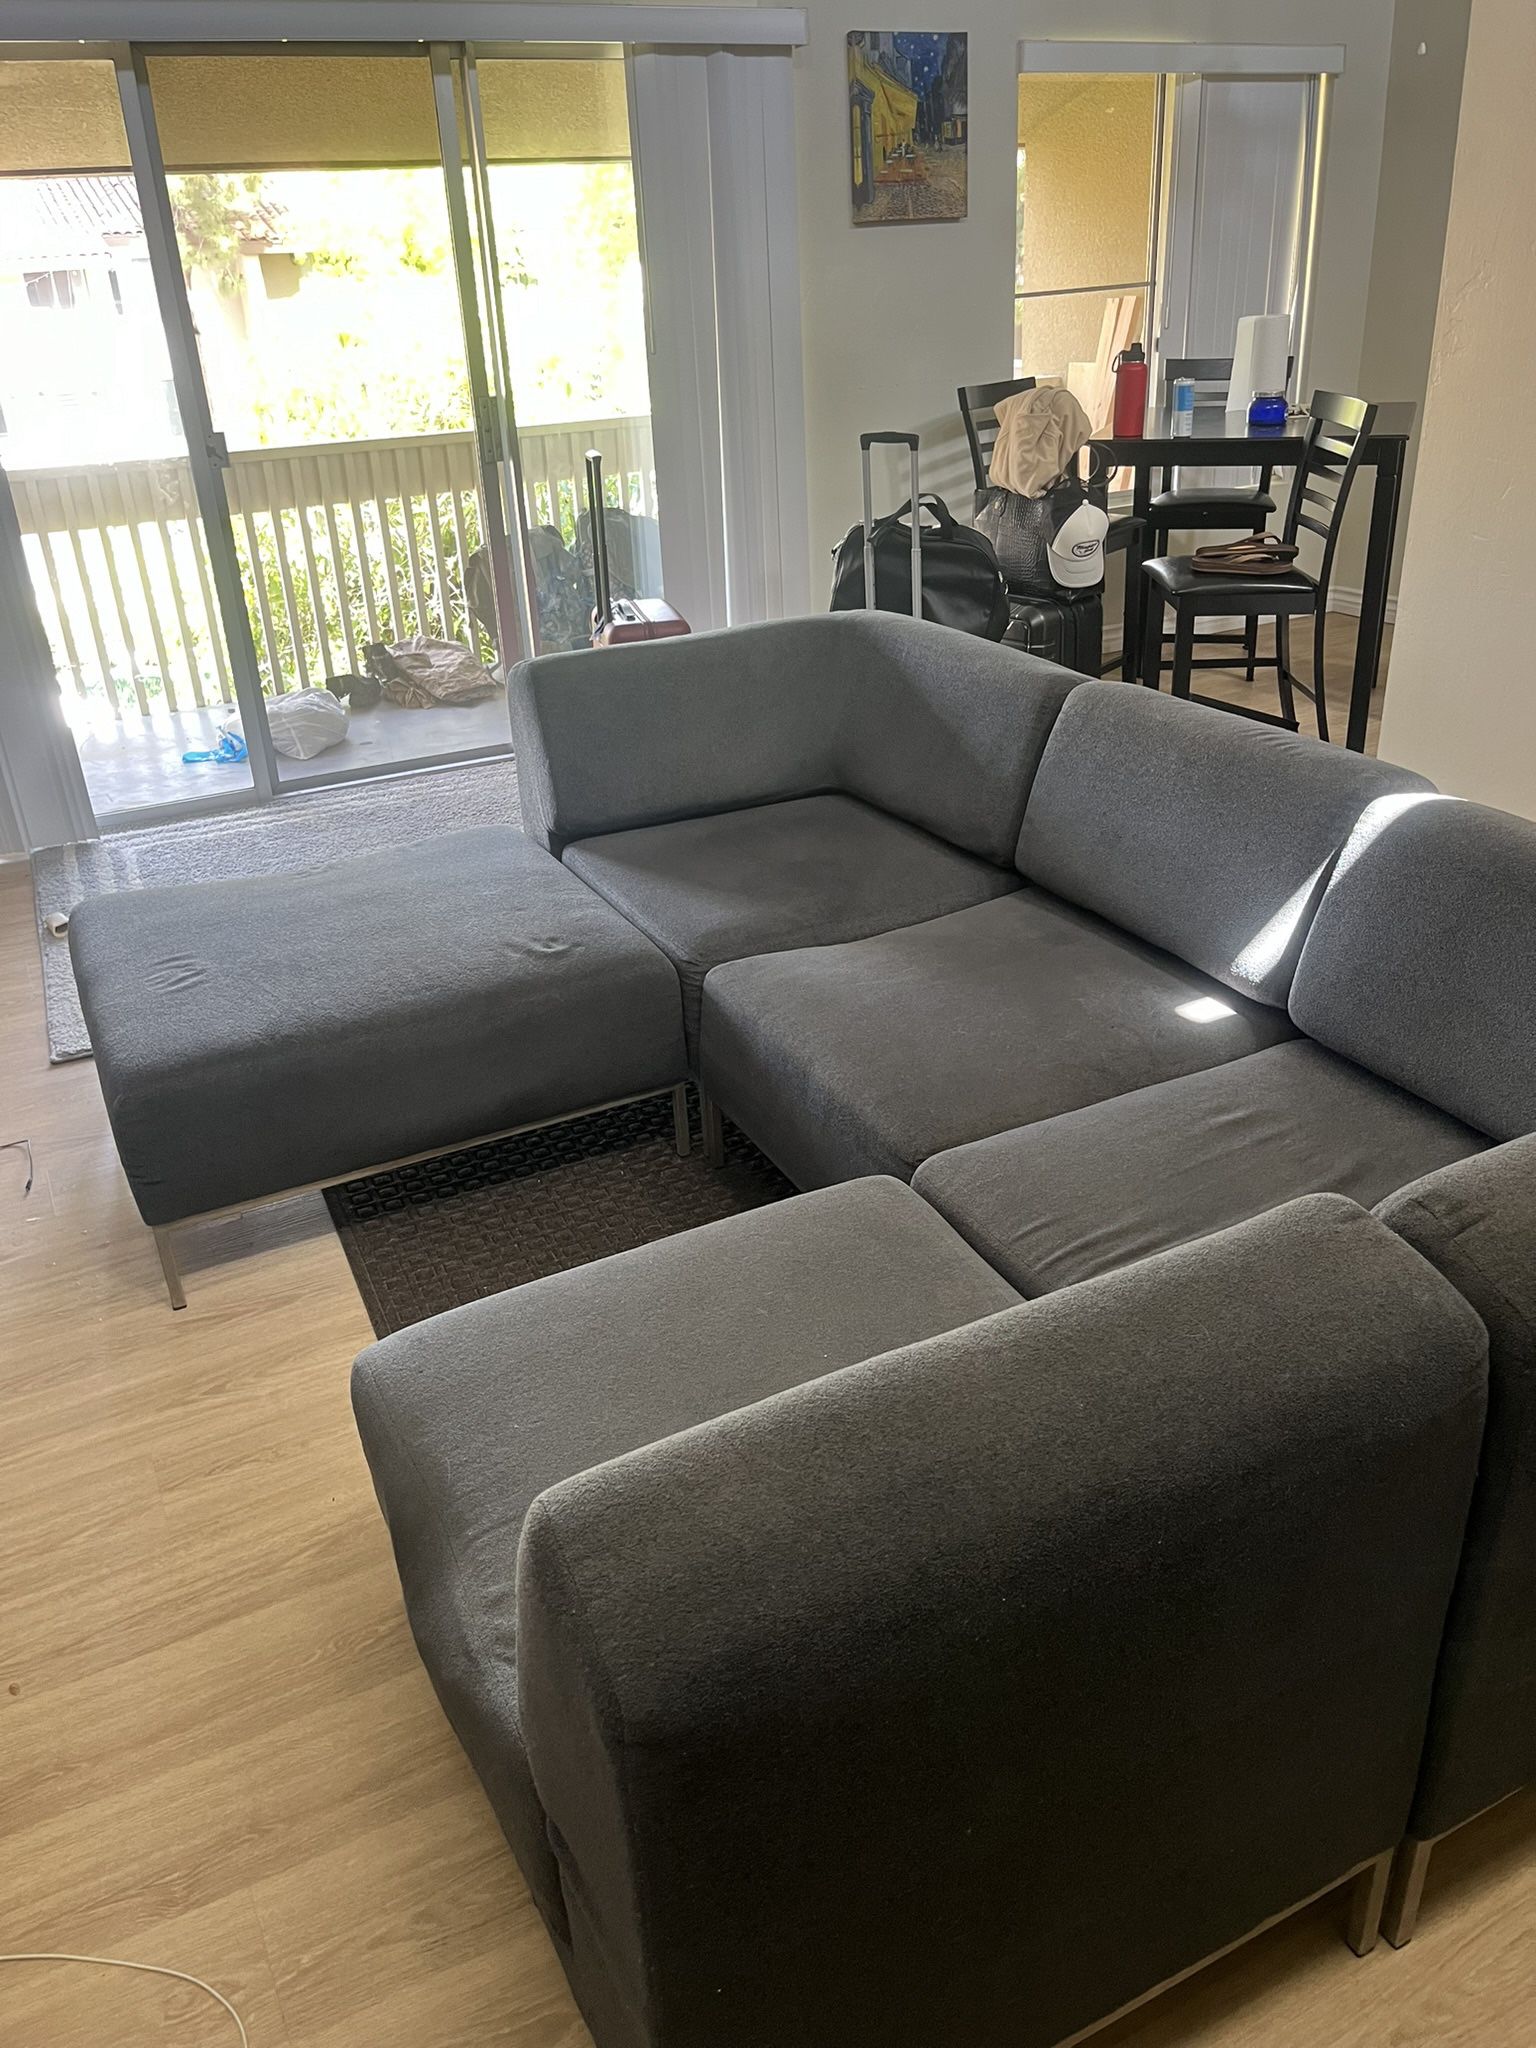 6 Panel Sectional Couch